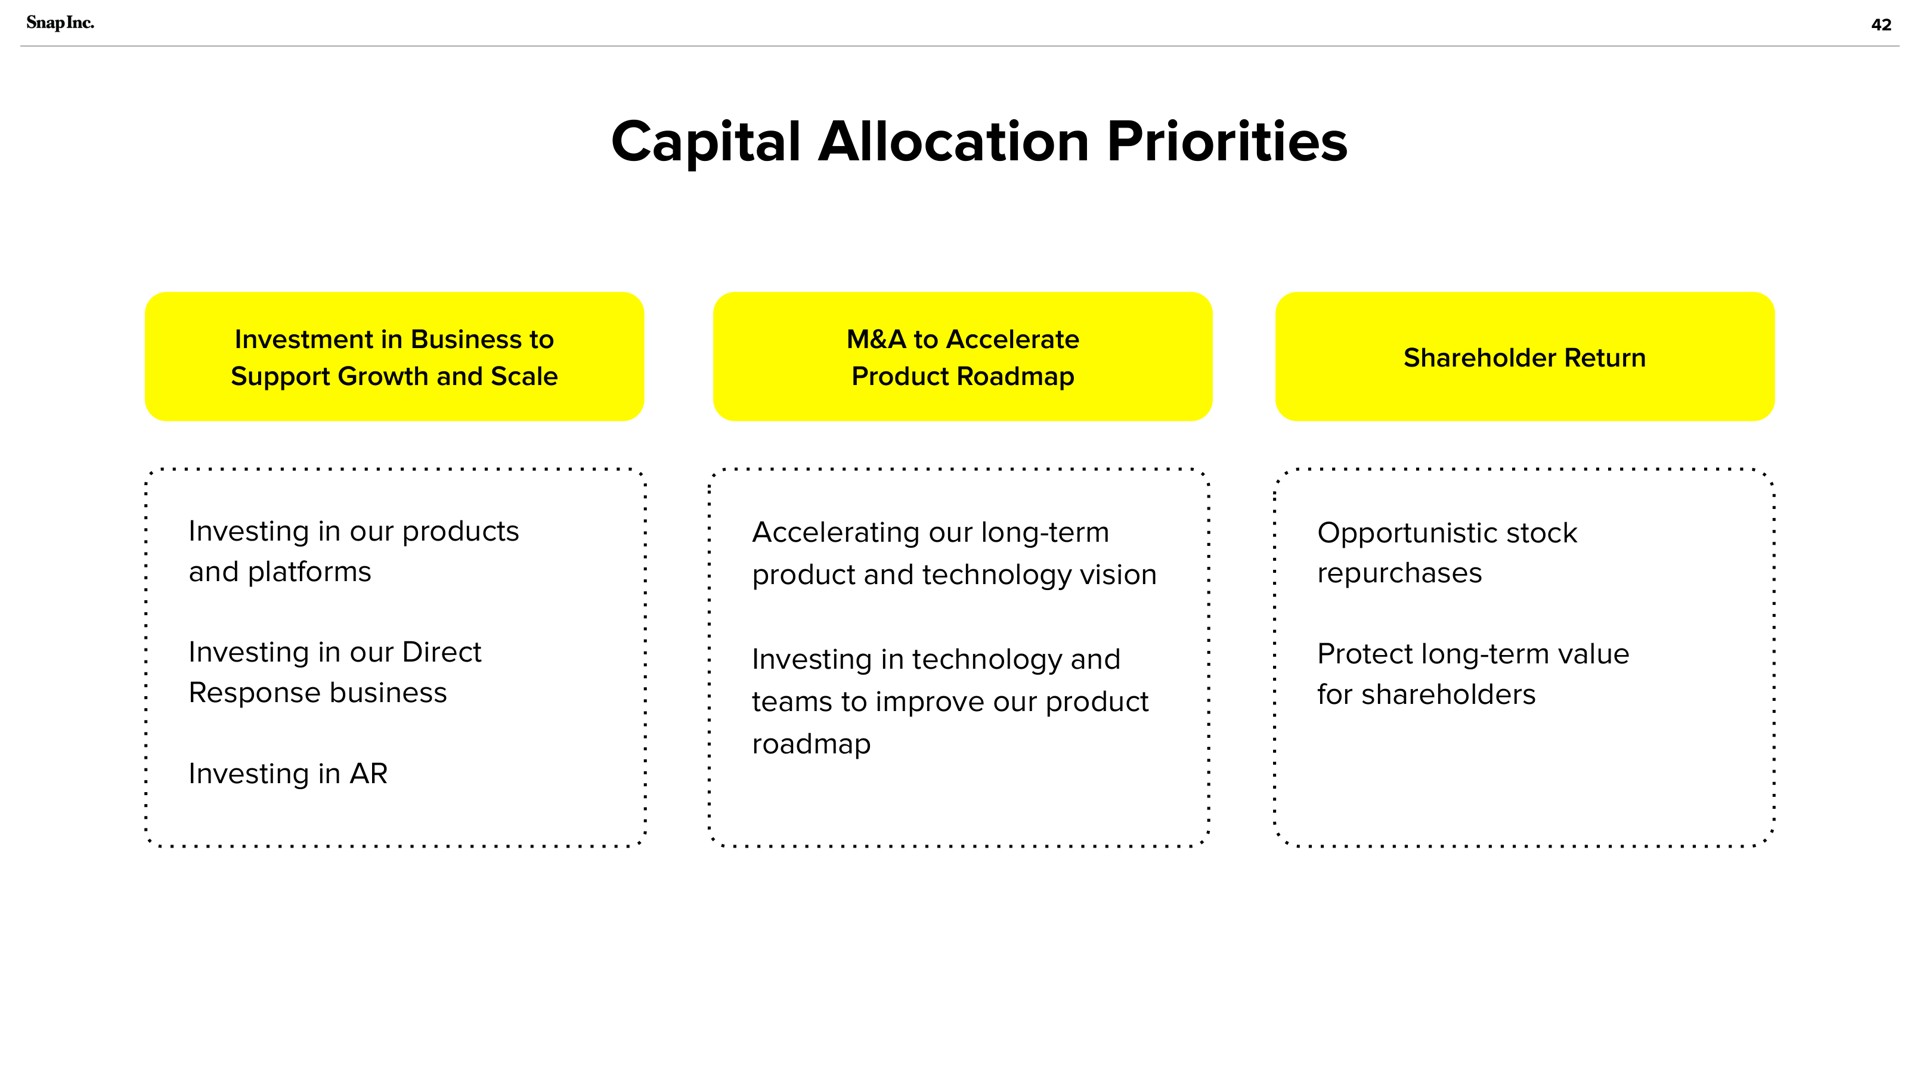 capital allocation priorities and platforms product and technology vision repurchases | Snap Inc